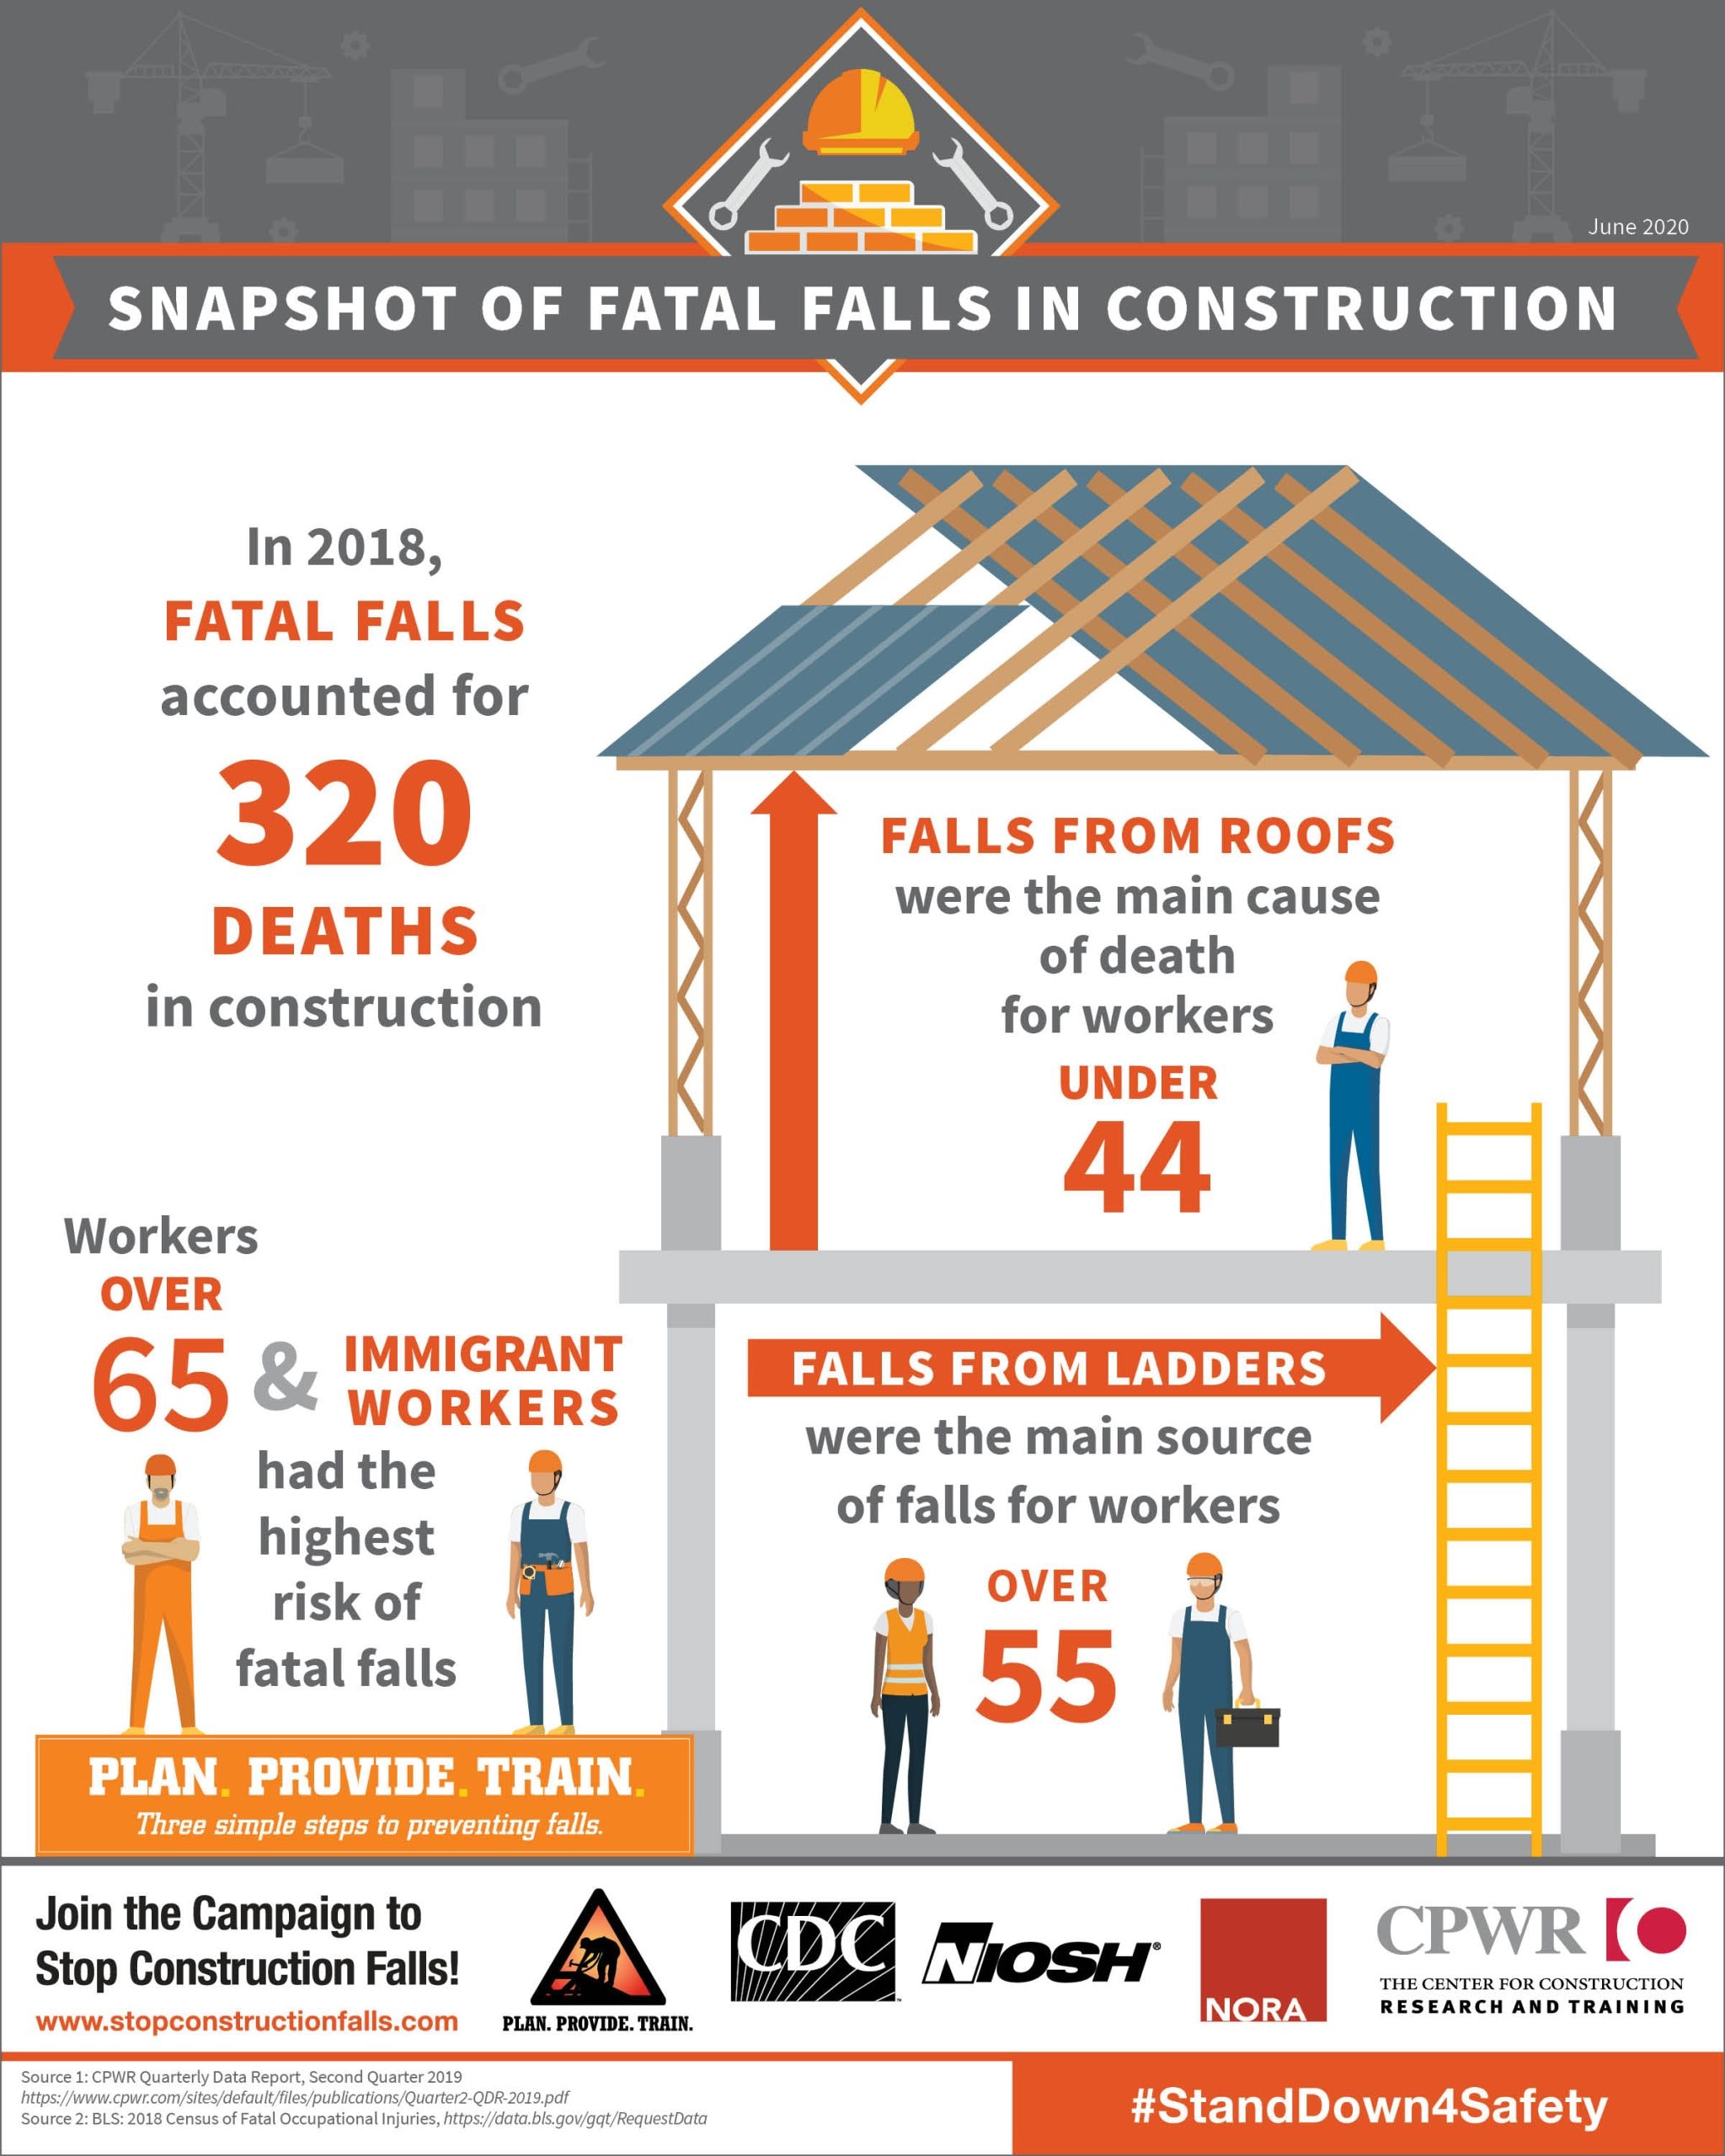 Snapshot of falls in construction describes that there were 320 deaths in 2018, workers over 65 and immigrant workers had the highest risk of falls, falls from roofs were the main cause of death for workers under 44, and falls from ladders were the main cause of death for workers over 55.